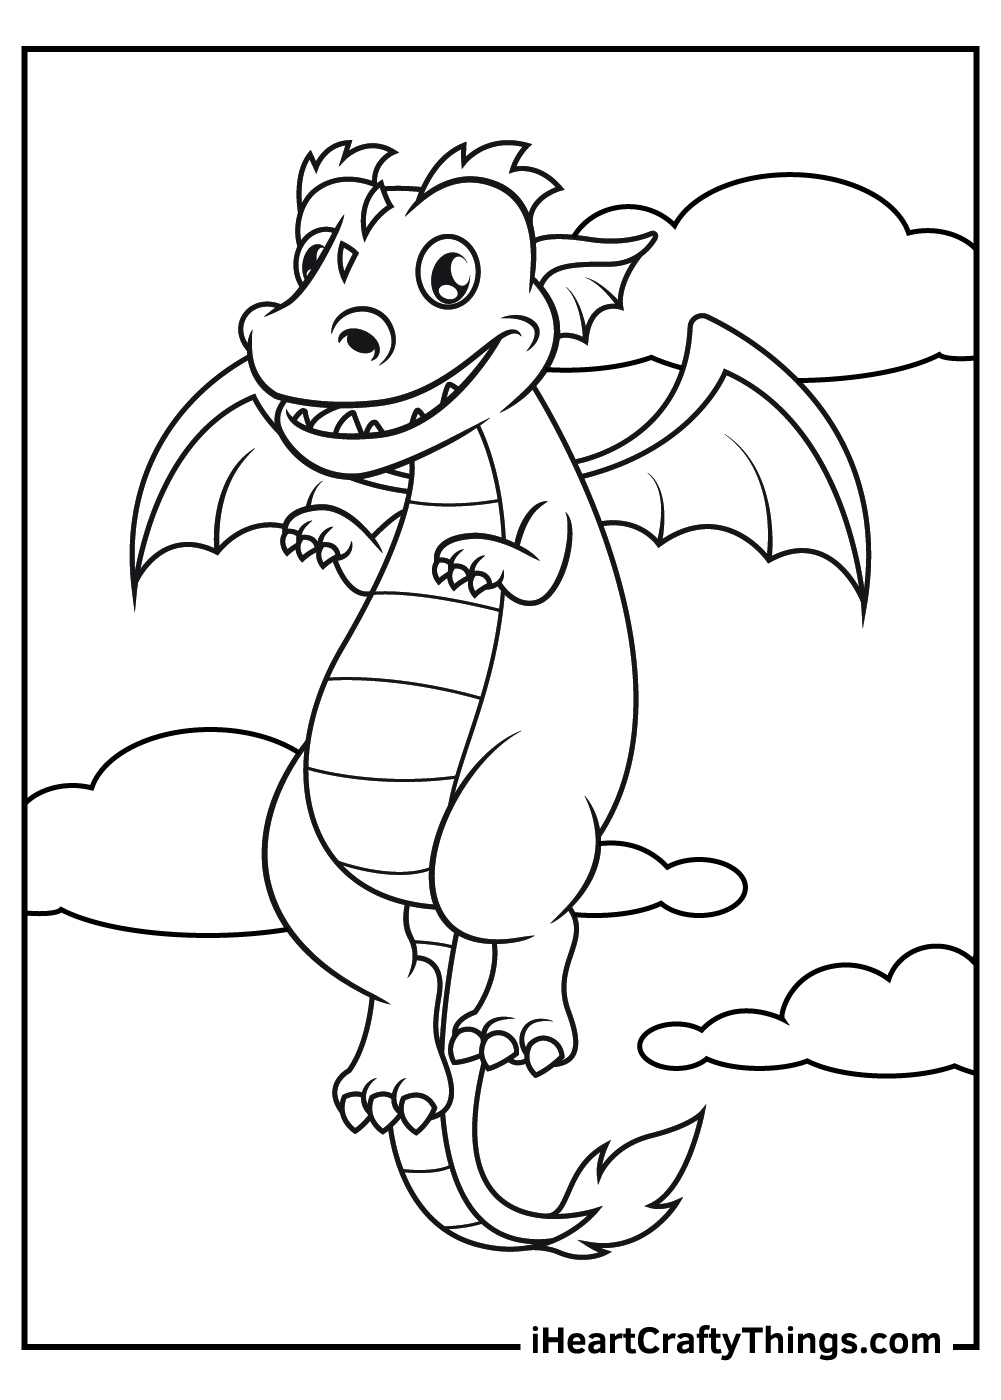 Dragon coloring pages free printables